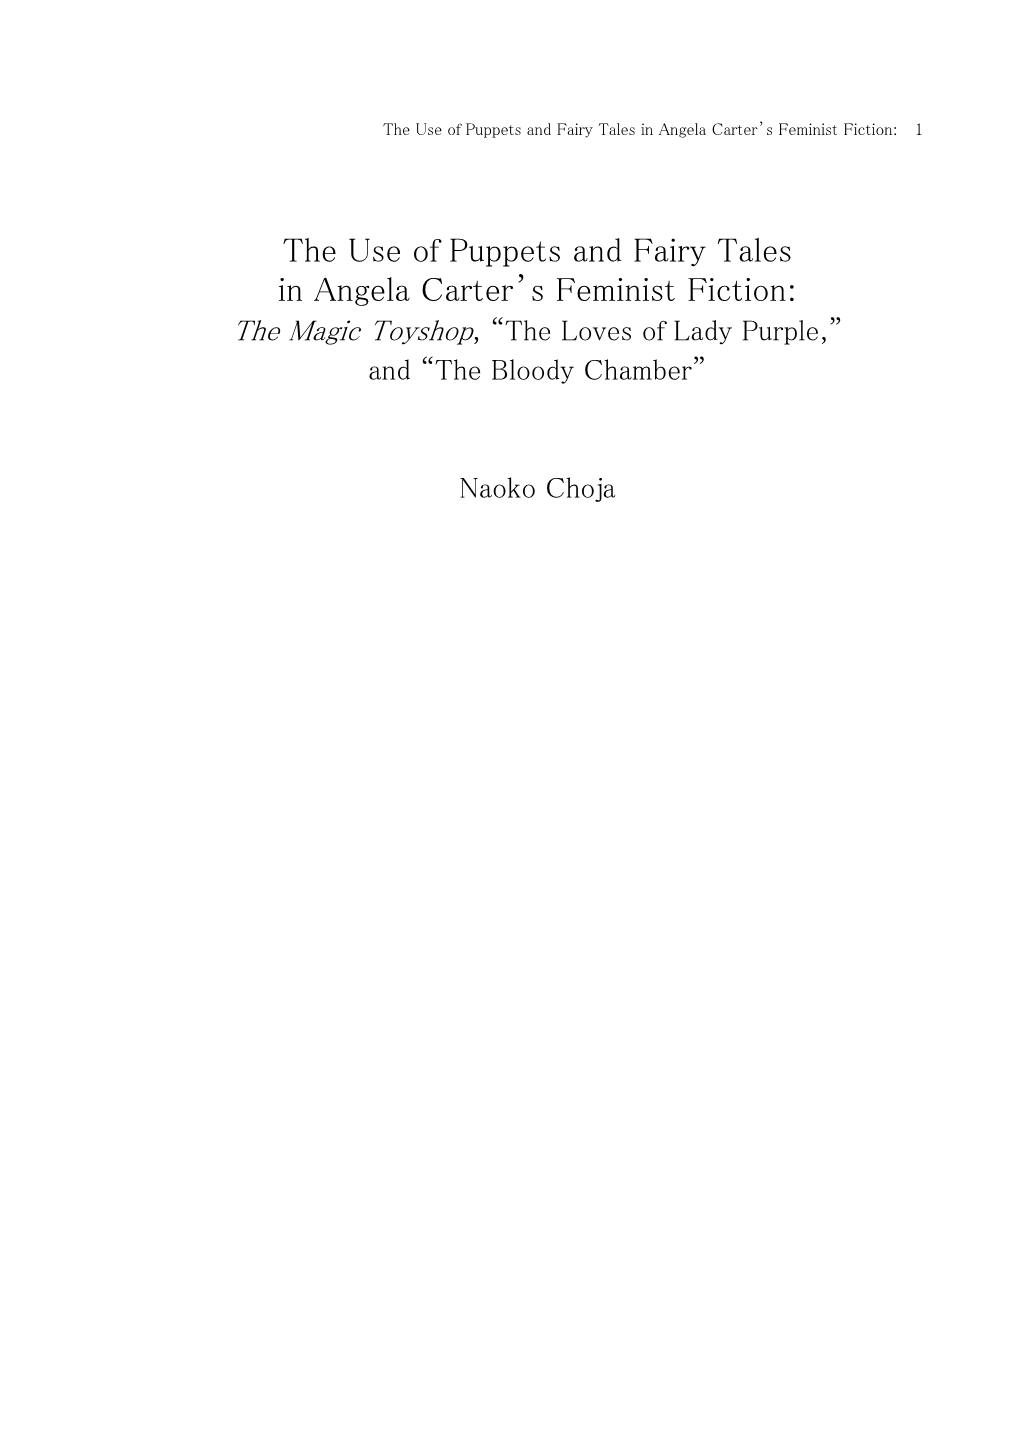 The Use of Puppets and Fairy Tales in Angela Carter's Feminist Fiction